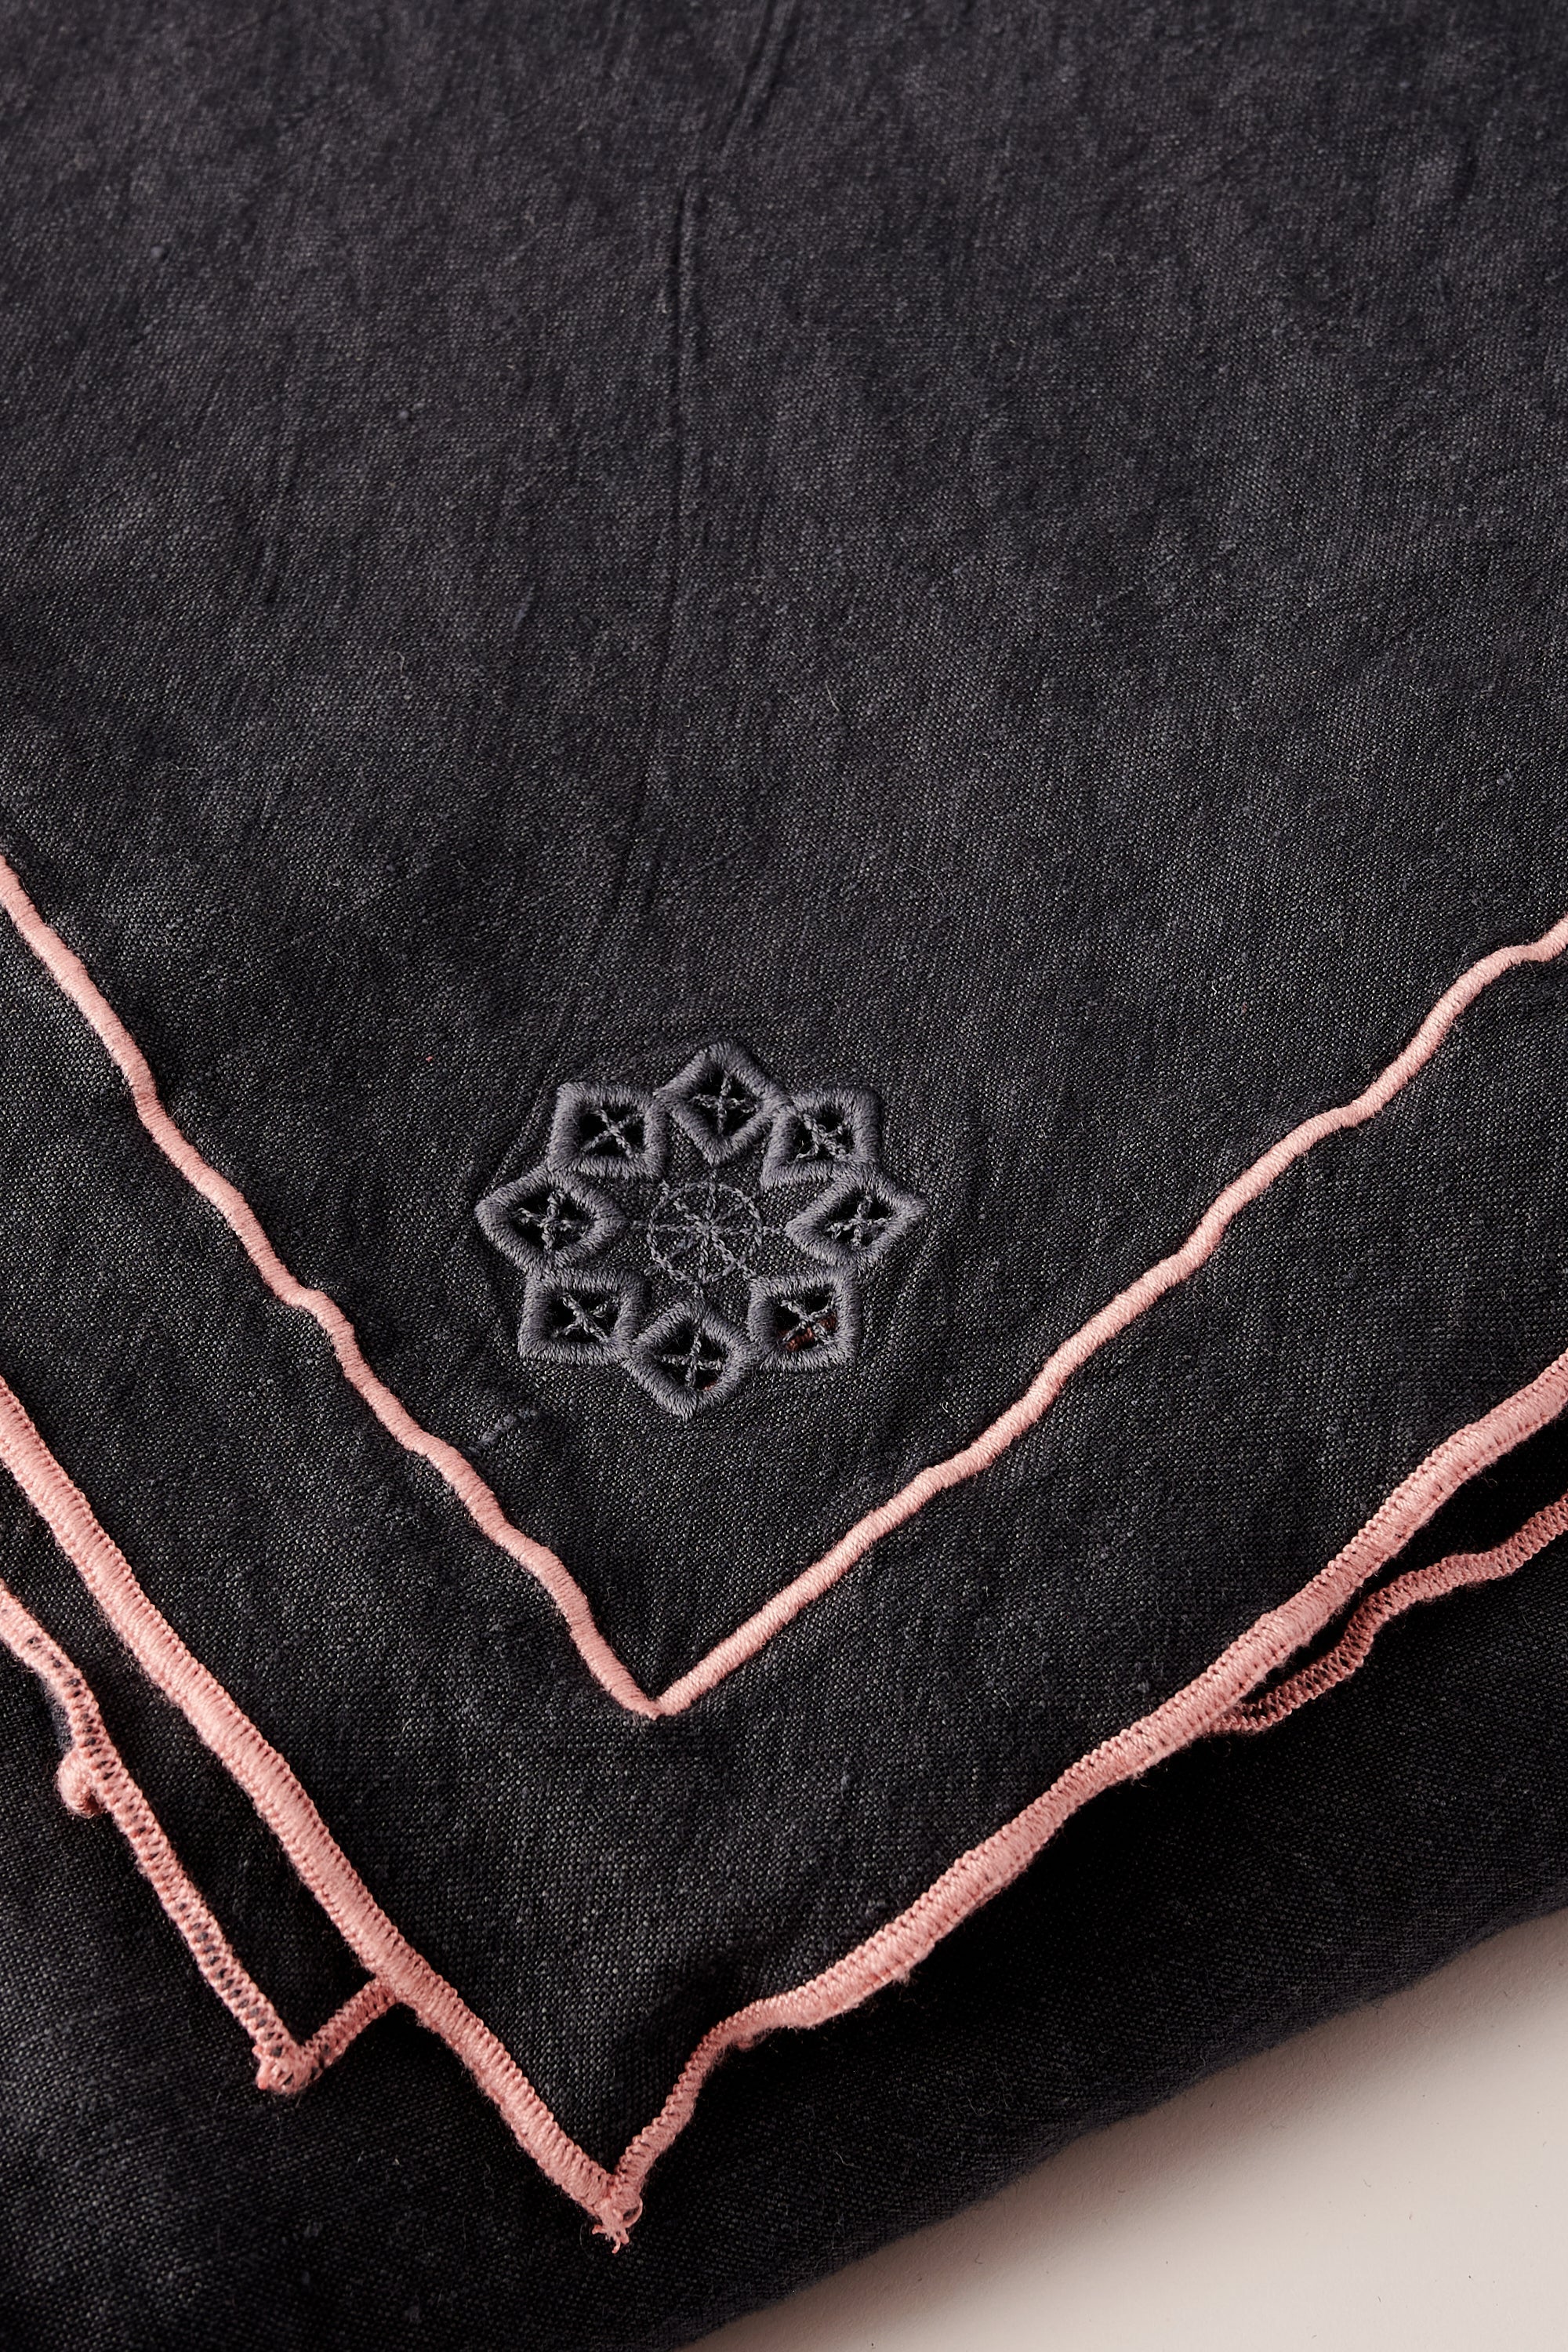 Day for Night Tablecloth in Slate Base with Peony